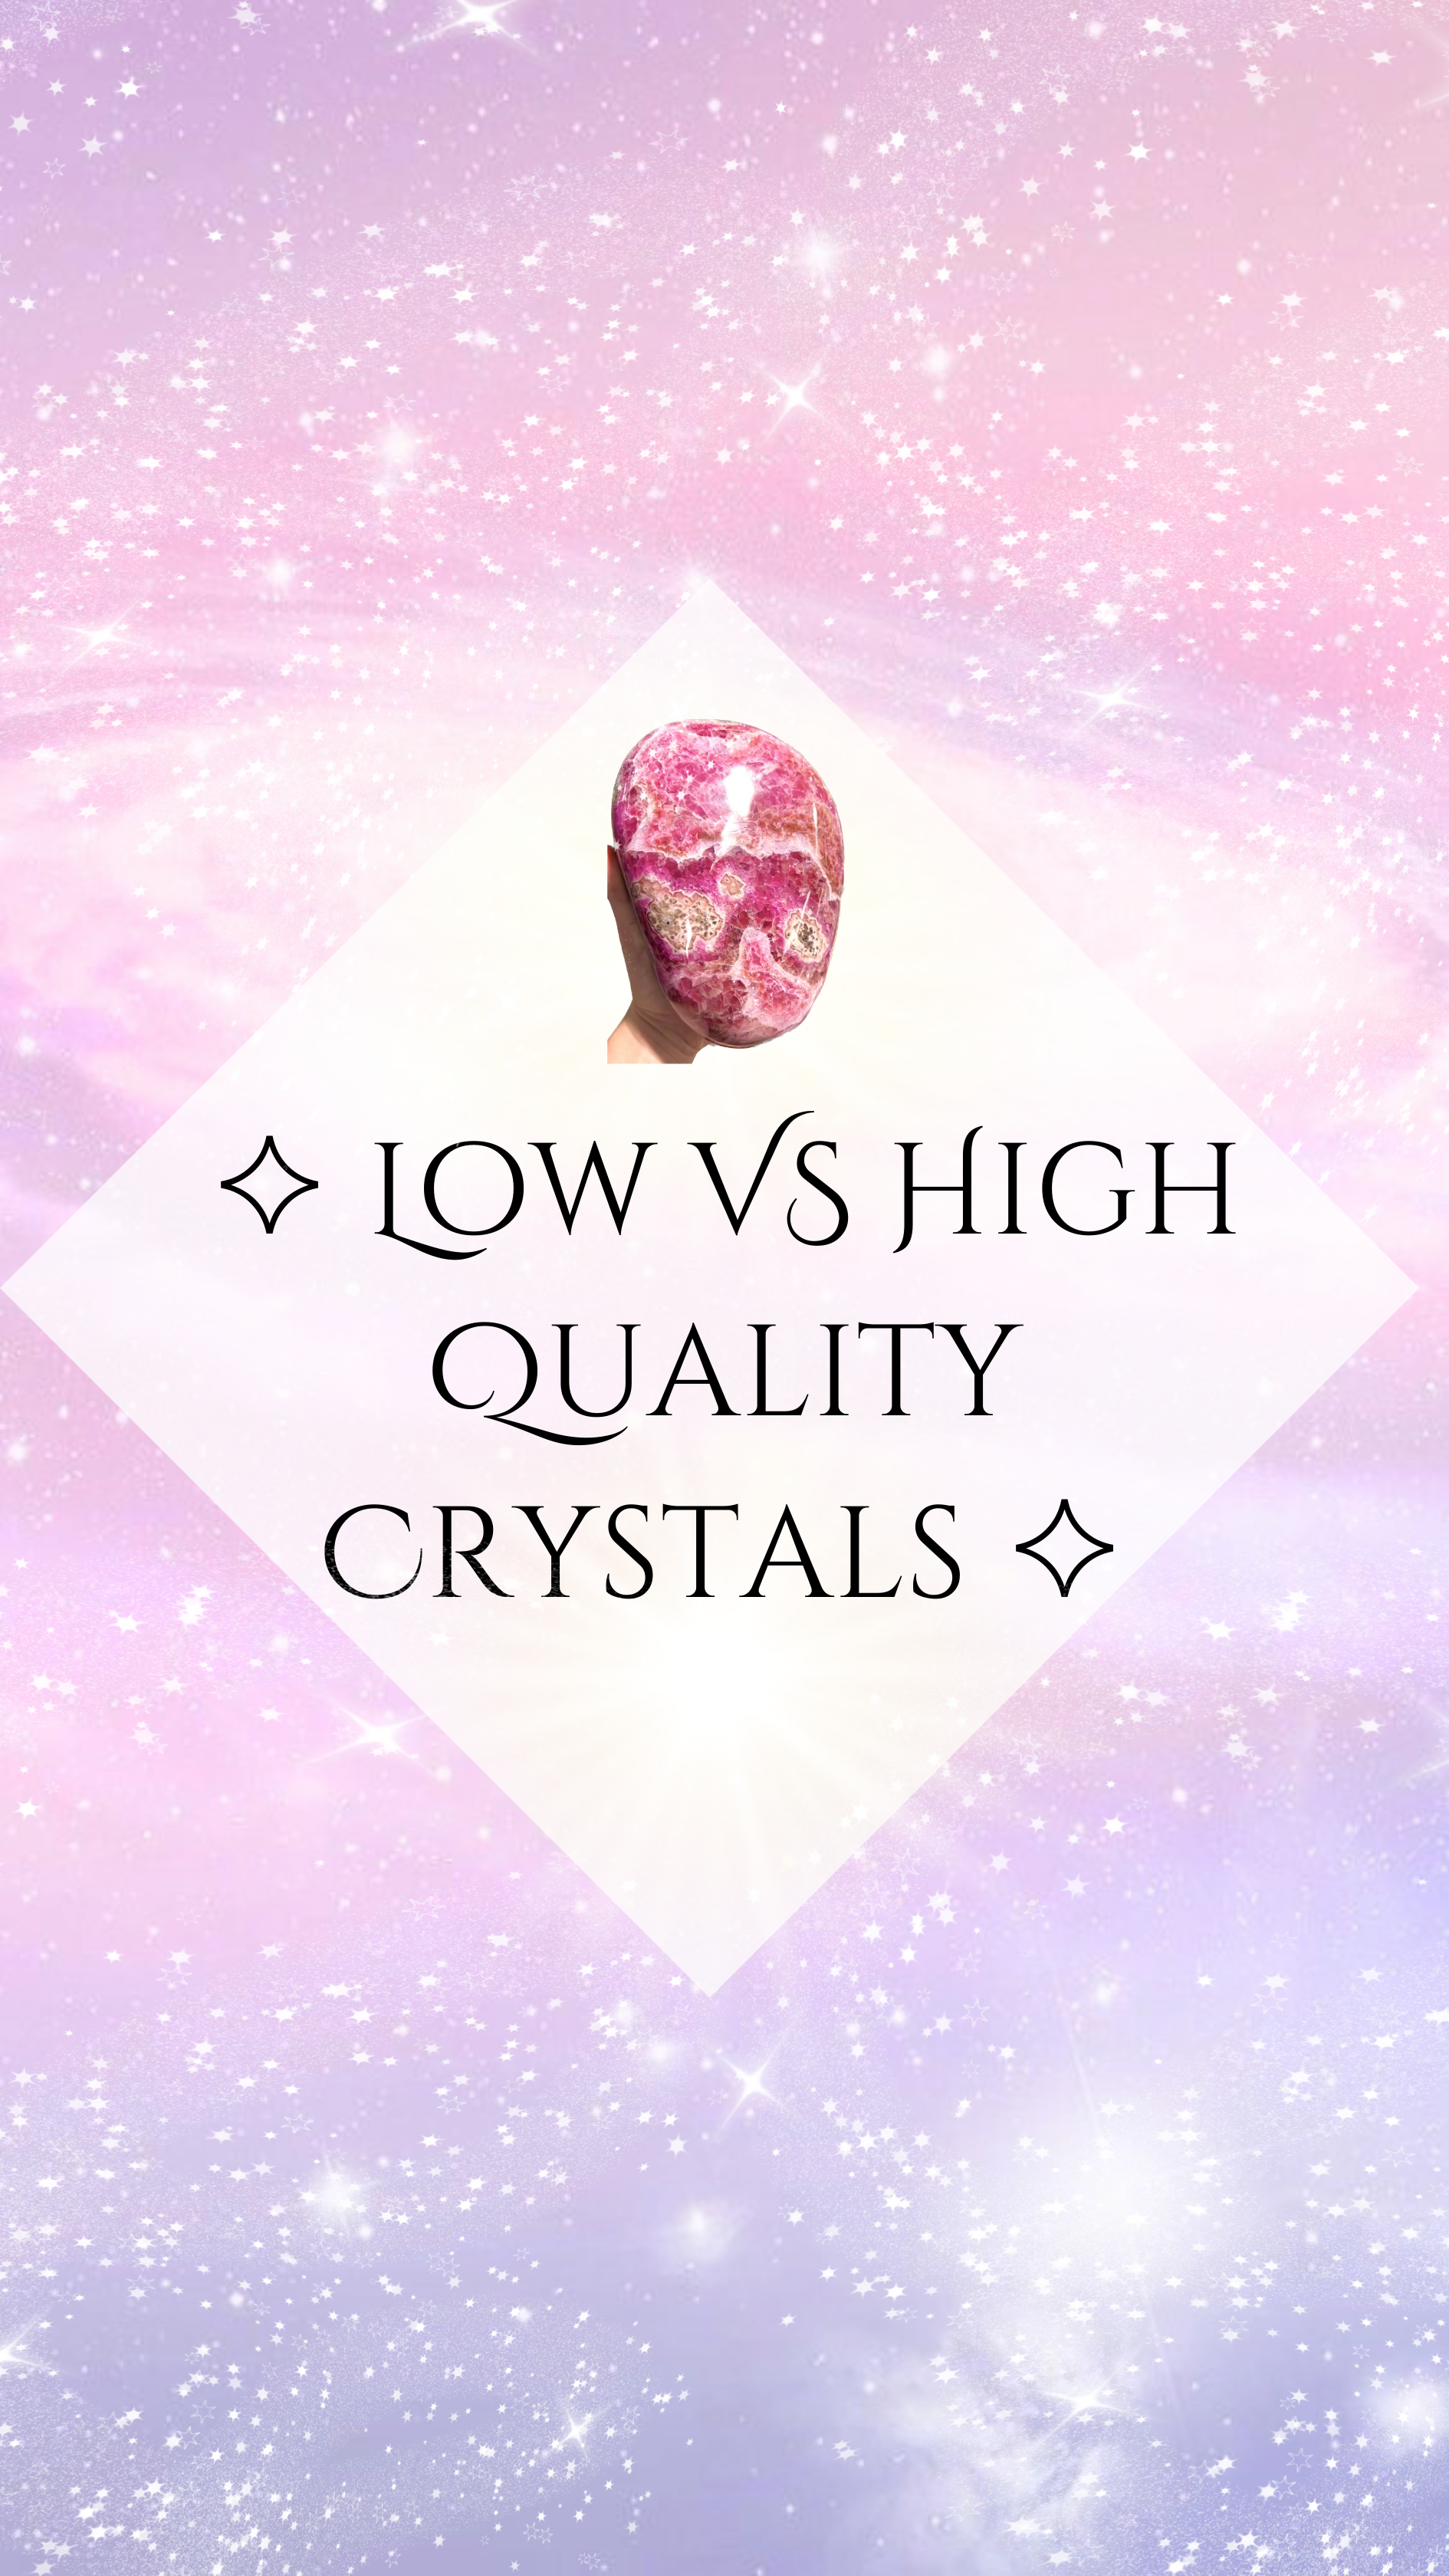 ✧ Low VS High Quality Crystals ✧